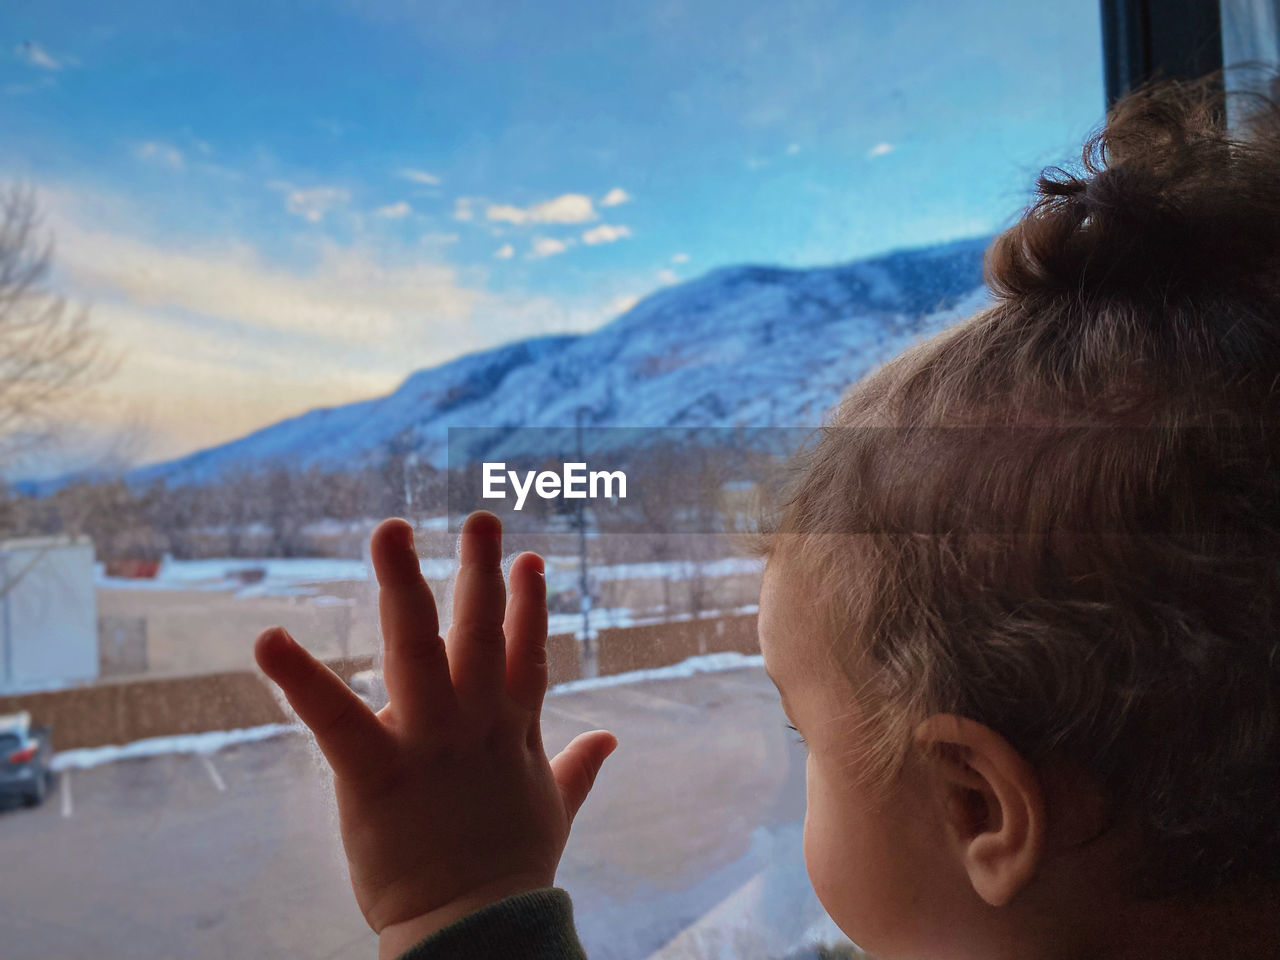 snow, mountain, one person, child, childhood, headshot, portrait, hand, mountain range, nature, men, winter, cold temperature, vacation, sky, day, blue, leisure activity, person, cloud, looking, outdoors, focus on foreground, beauty in nature, finger, environment, gesturing, rear view, holiday, scenics - nature, close-up, lifestyles, fun